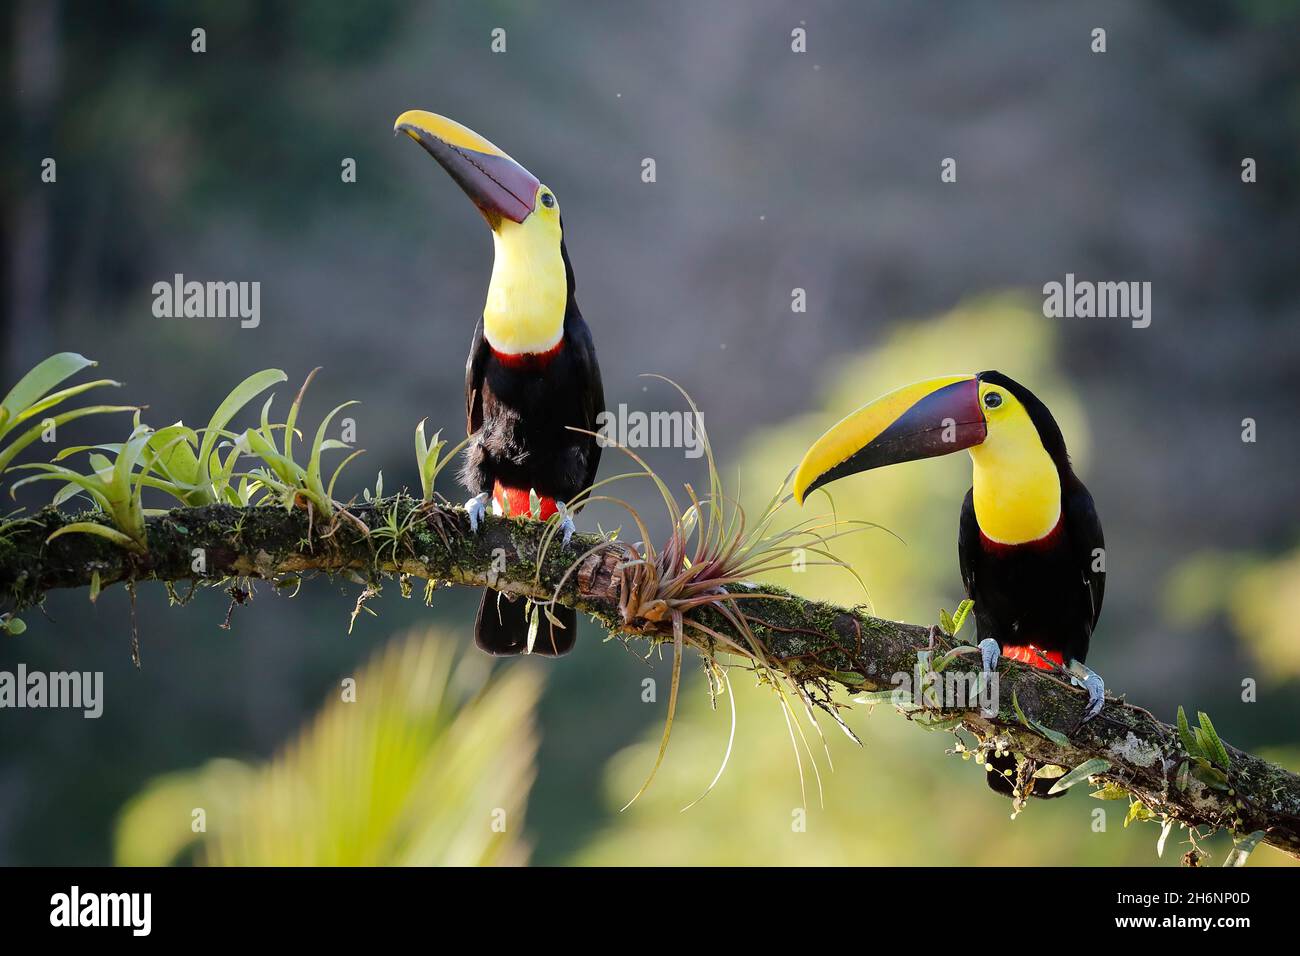 A pair of Swainson's toucans or brown-backed toucans (Ramphastos swainsonii) on branch with bromeliads, Boca Tapada region, Costa Rica Stock Photo